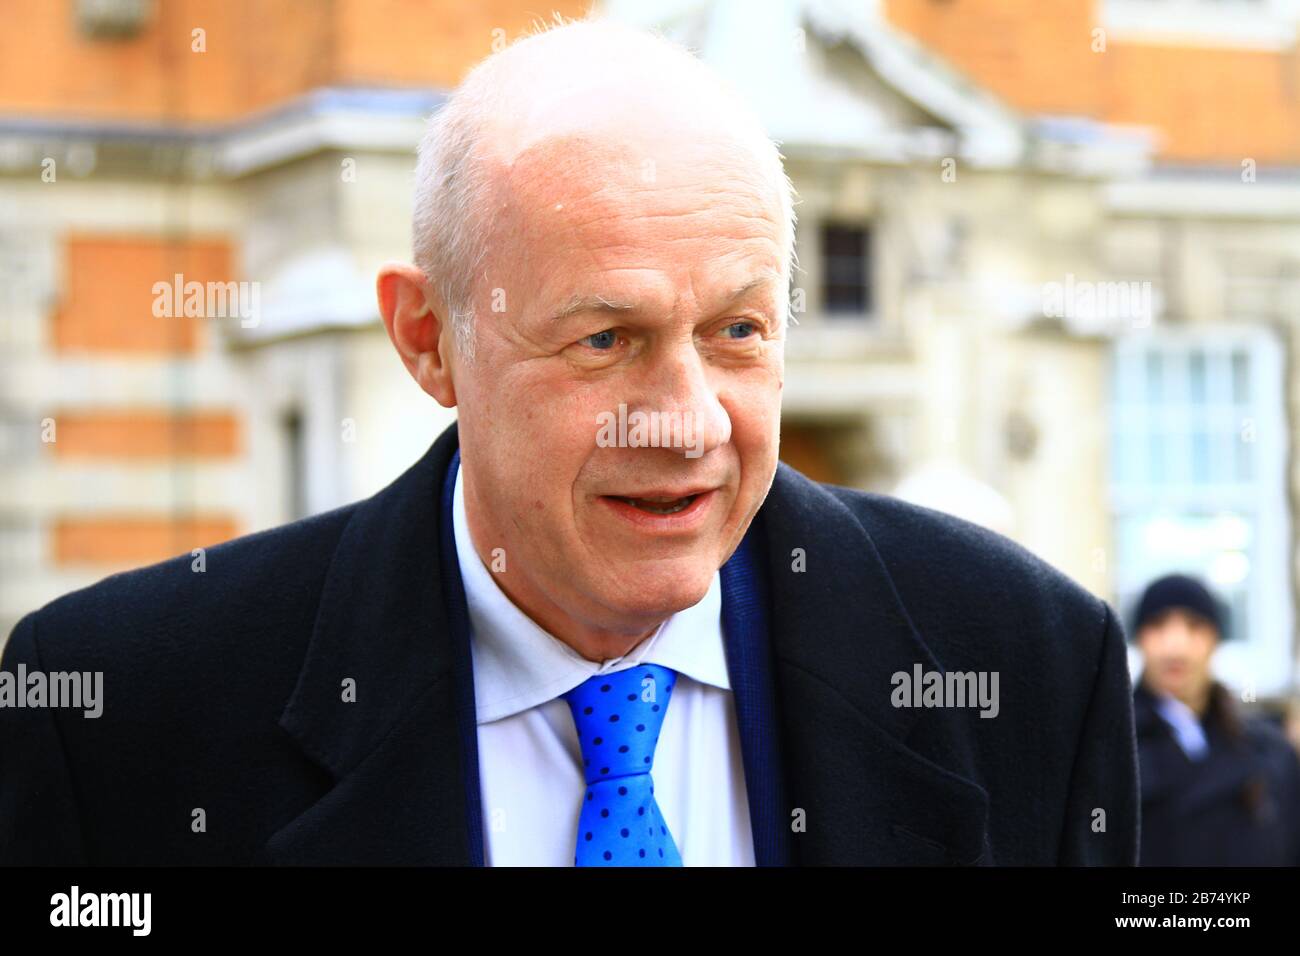 POLITICIAN DAMIEN GREEN MP PICTURED IN THE BOROUGH OF WESTMINSTER, LONDON, ENGLAND, UK ON THE 11TH MARCH 2020. TORY PARTY MPS. CONSERVATIVE PARTY MPS. MINISTERS. BRITISH POLITICIANS. POLITICS. UK POLITICS. FAMOUS POLITICIANS. Stock Photo